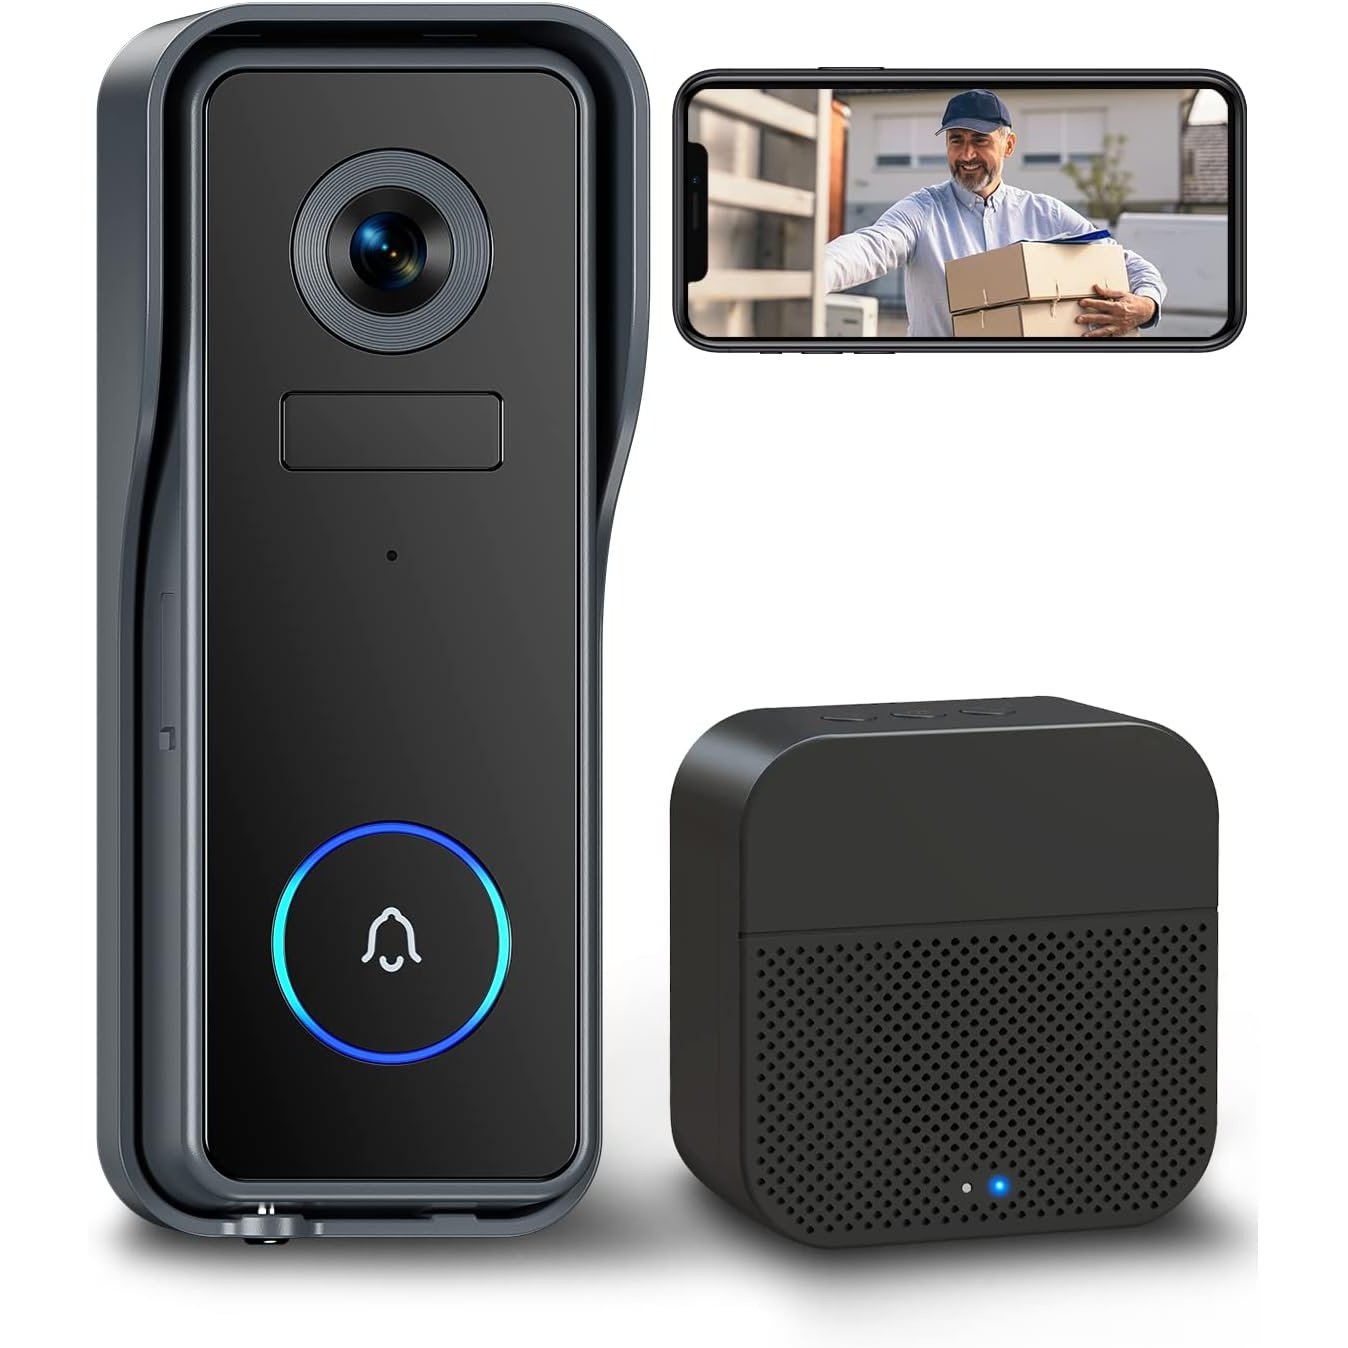 EUKI Wireless Video Doorbell Camera with Chime, Door Bell Ringer Wireless with Camera, 2K HD, Human Detection, Night Vision, 2-Way Audio, IP65